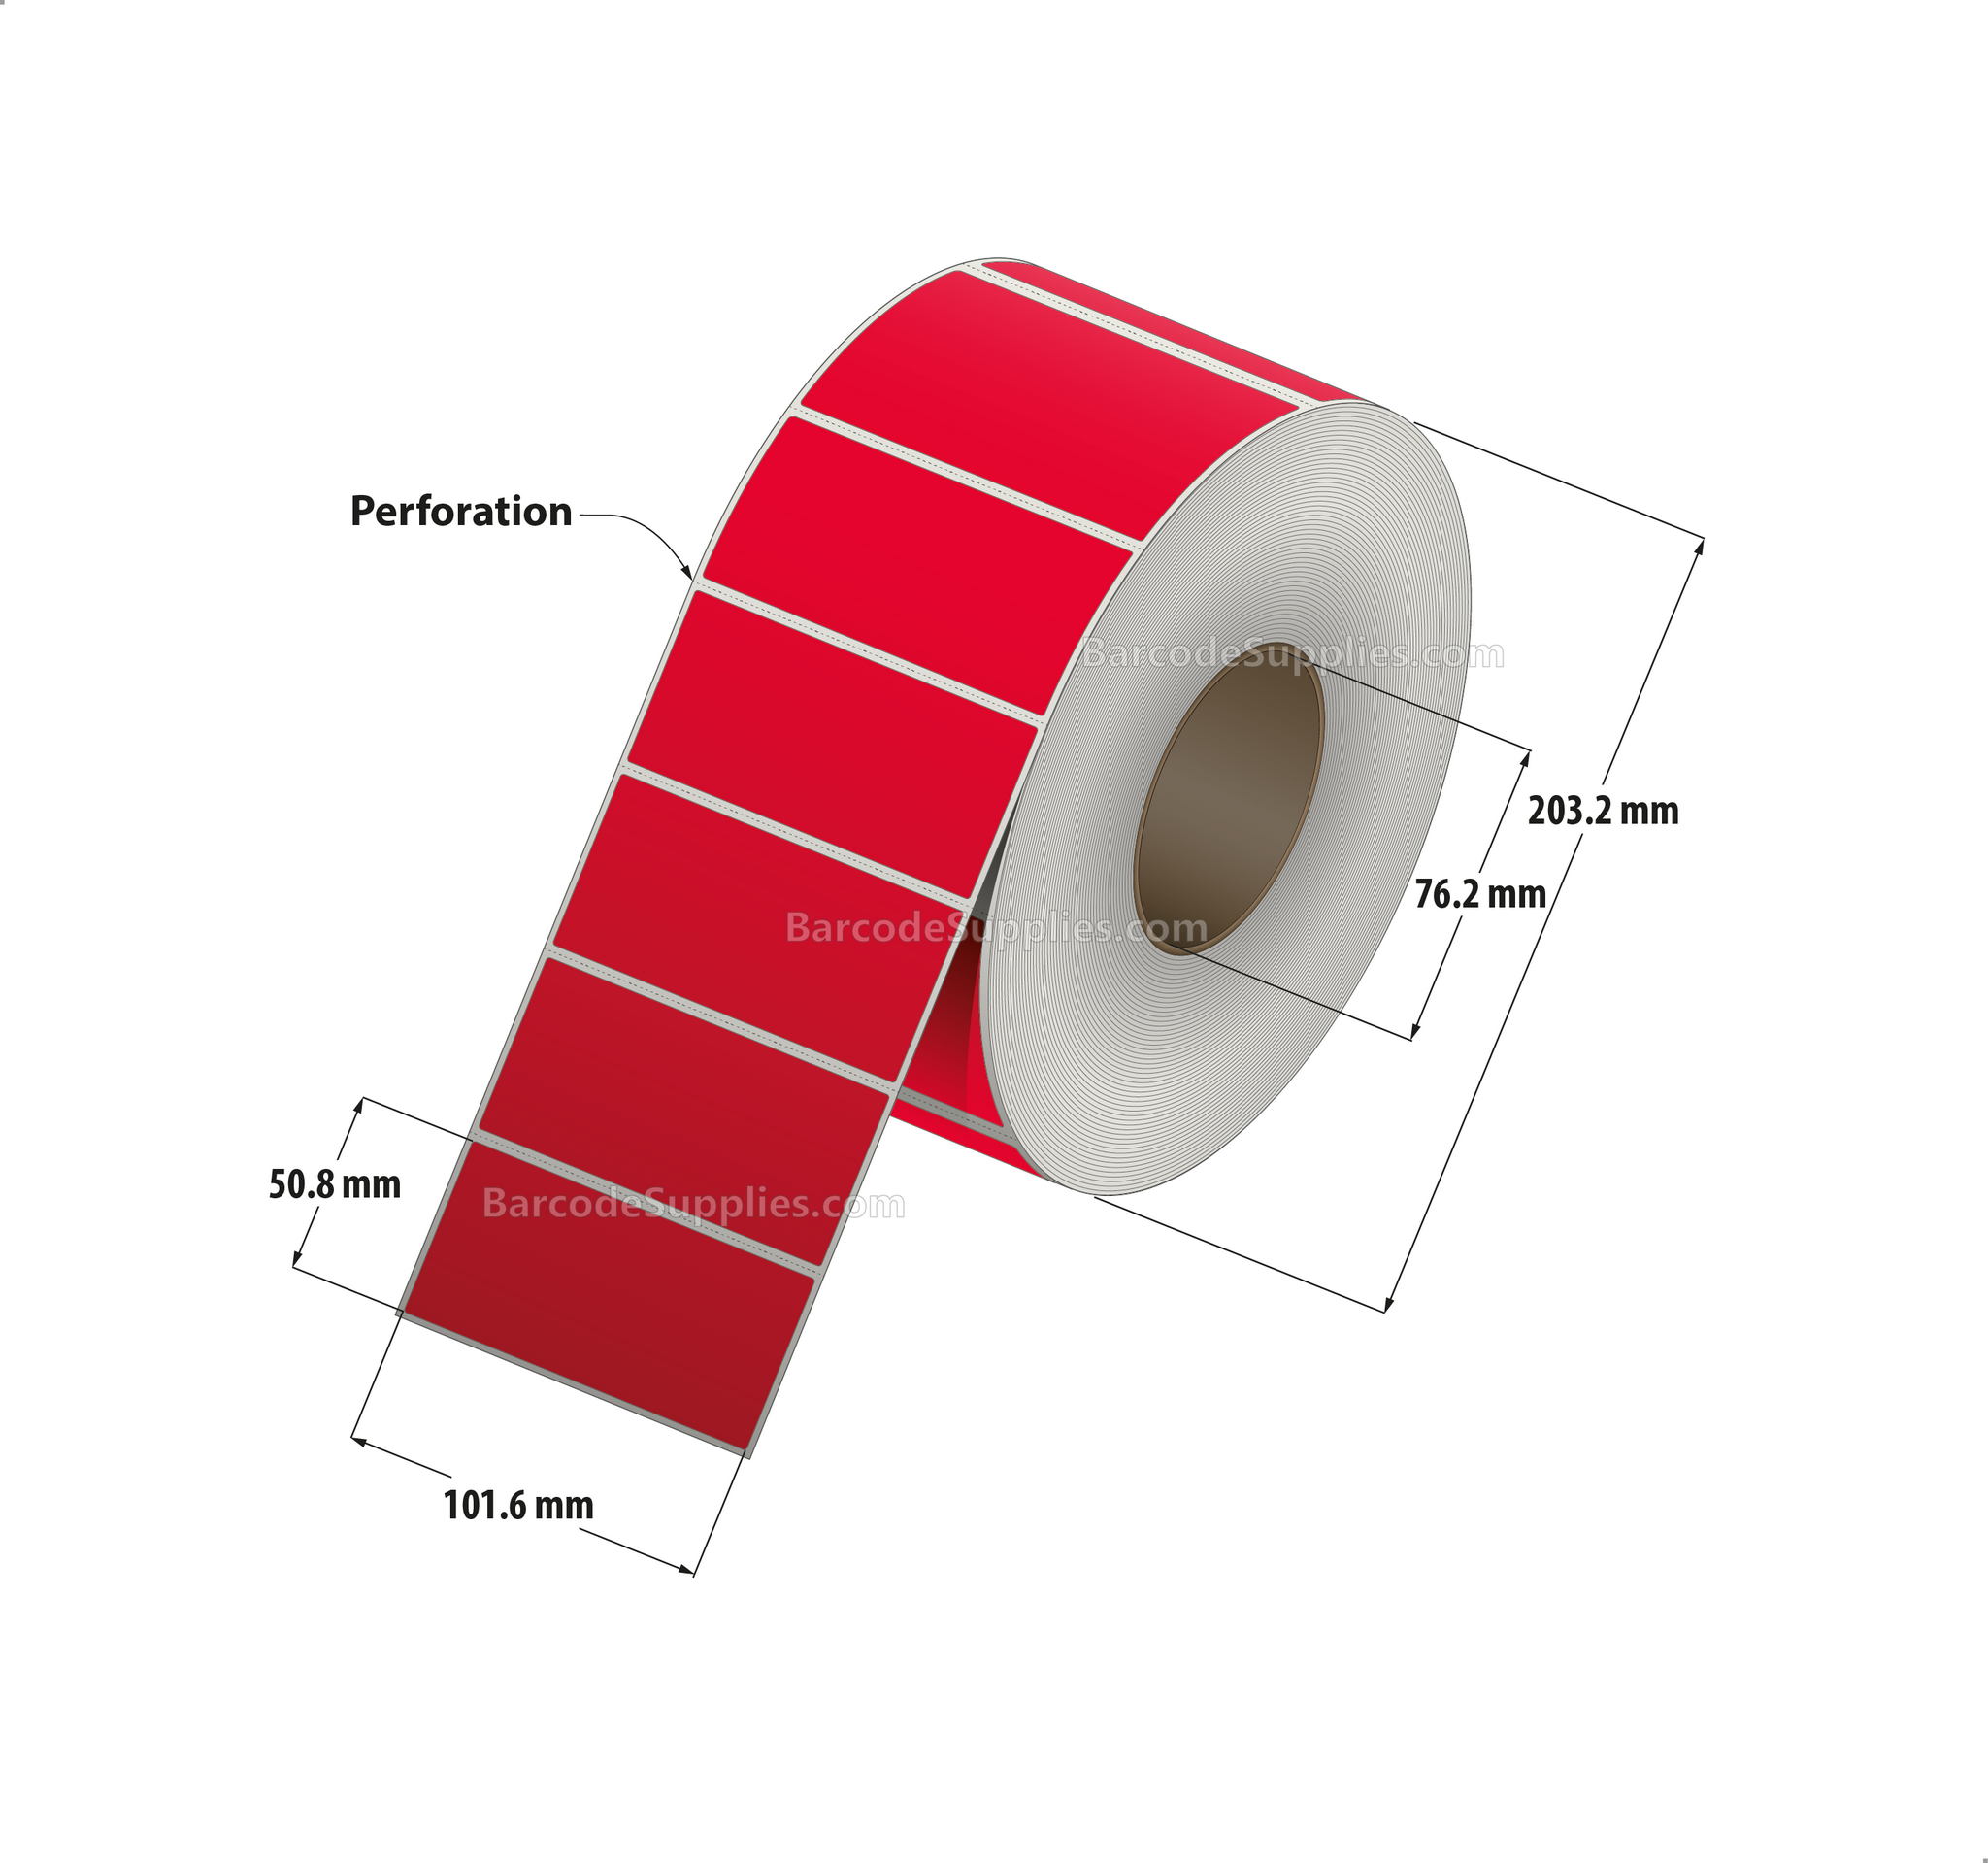 4 x 2 Thermal Transfer 032 Red Labels With Permanent Adhesive - Perforated - 2900 Labels Per Roll - Carton Of 4 Rolls - 11600 Labels Total - MPN: RFC-4-2-2900-RD